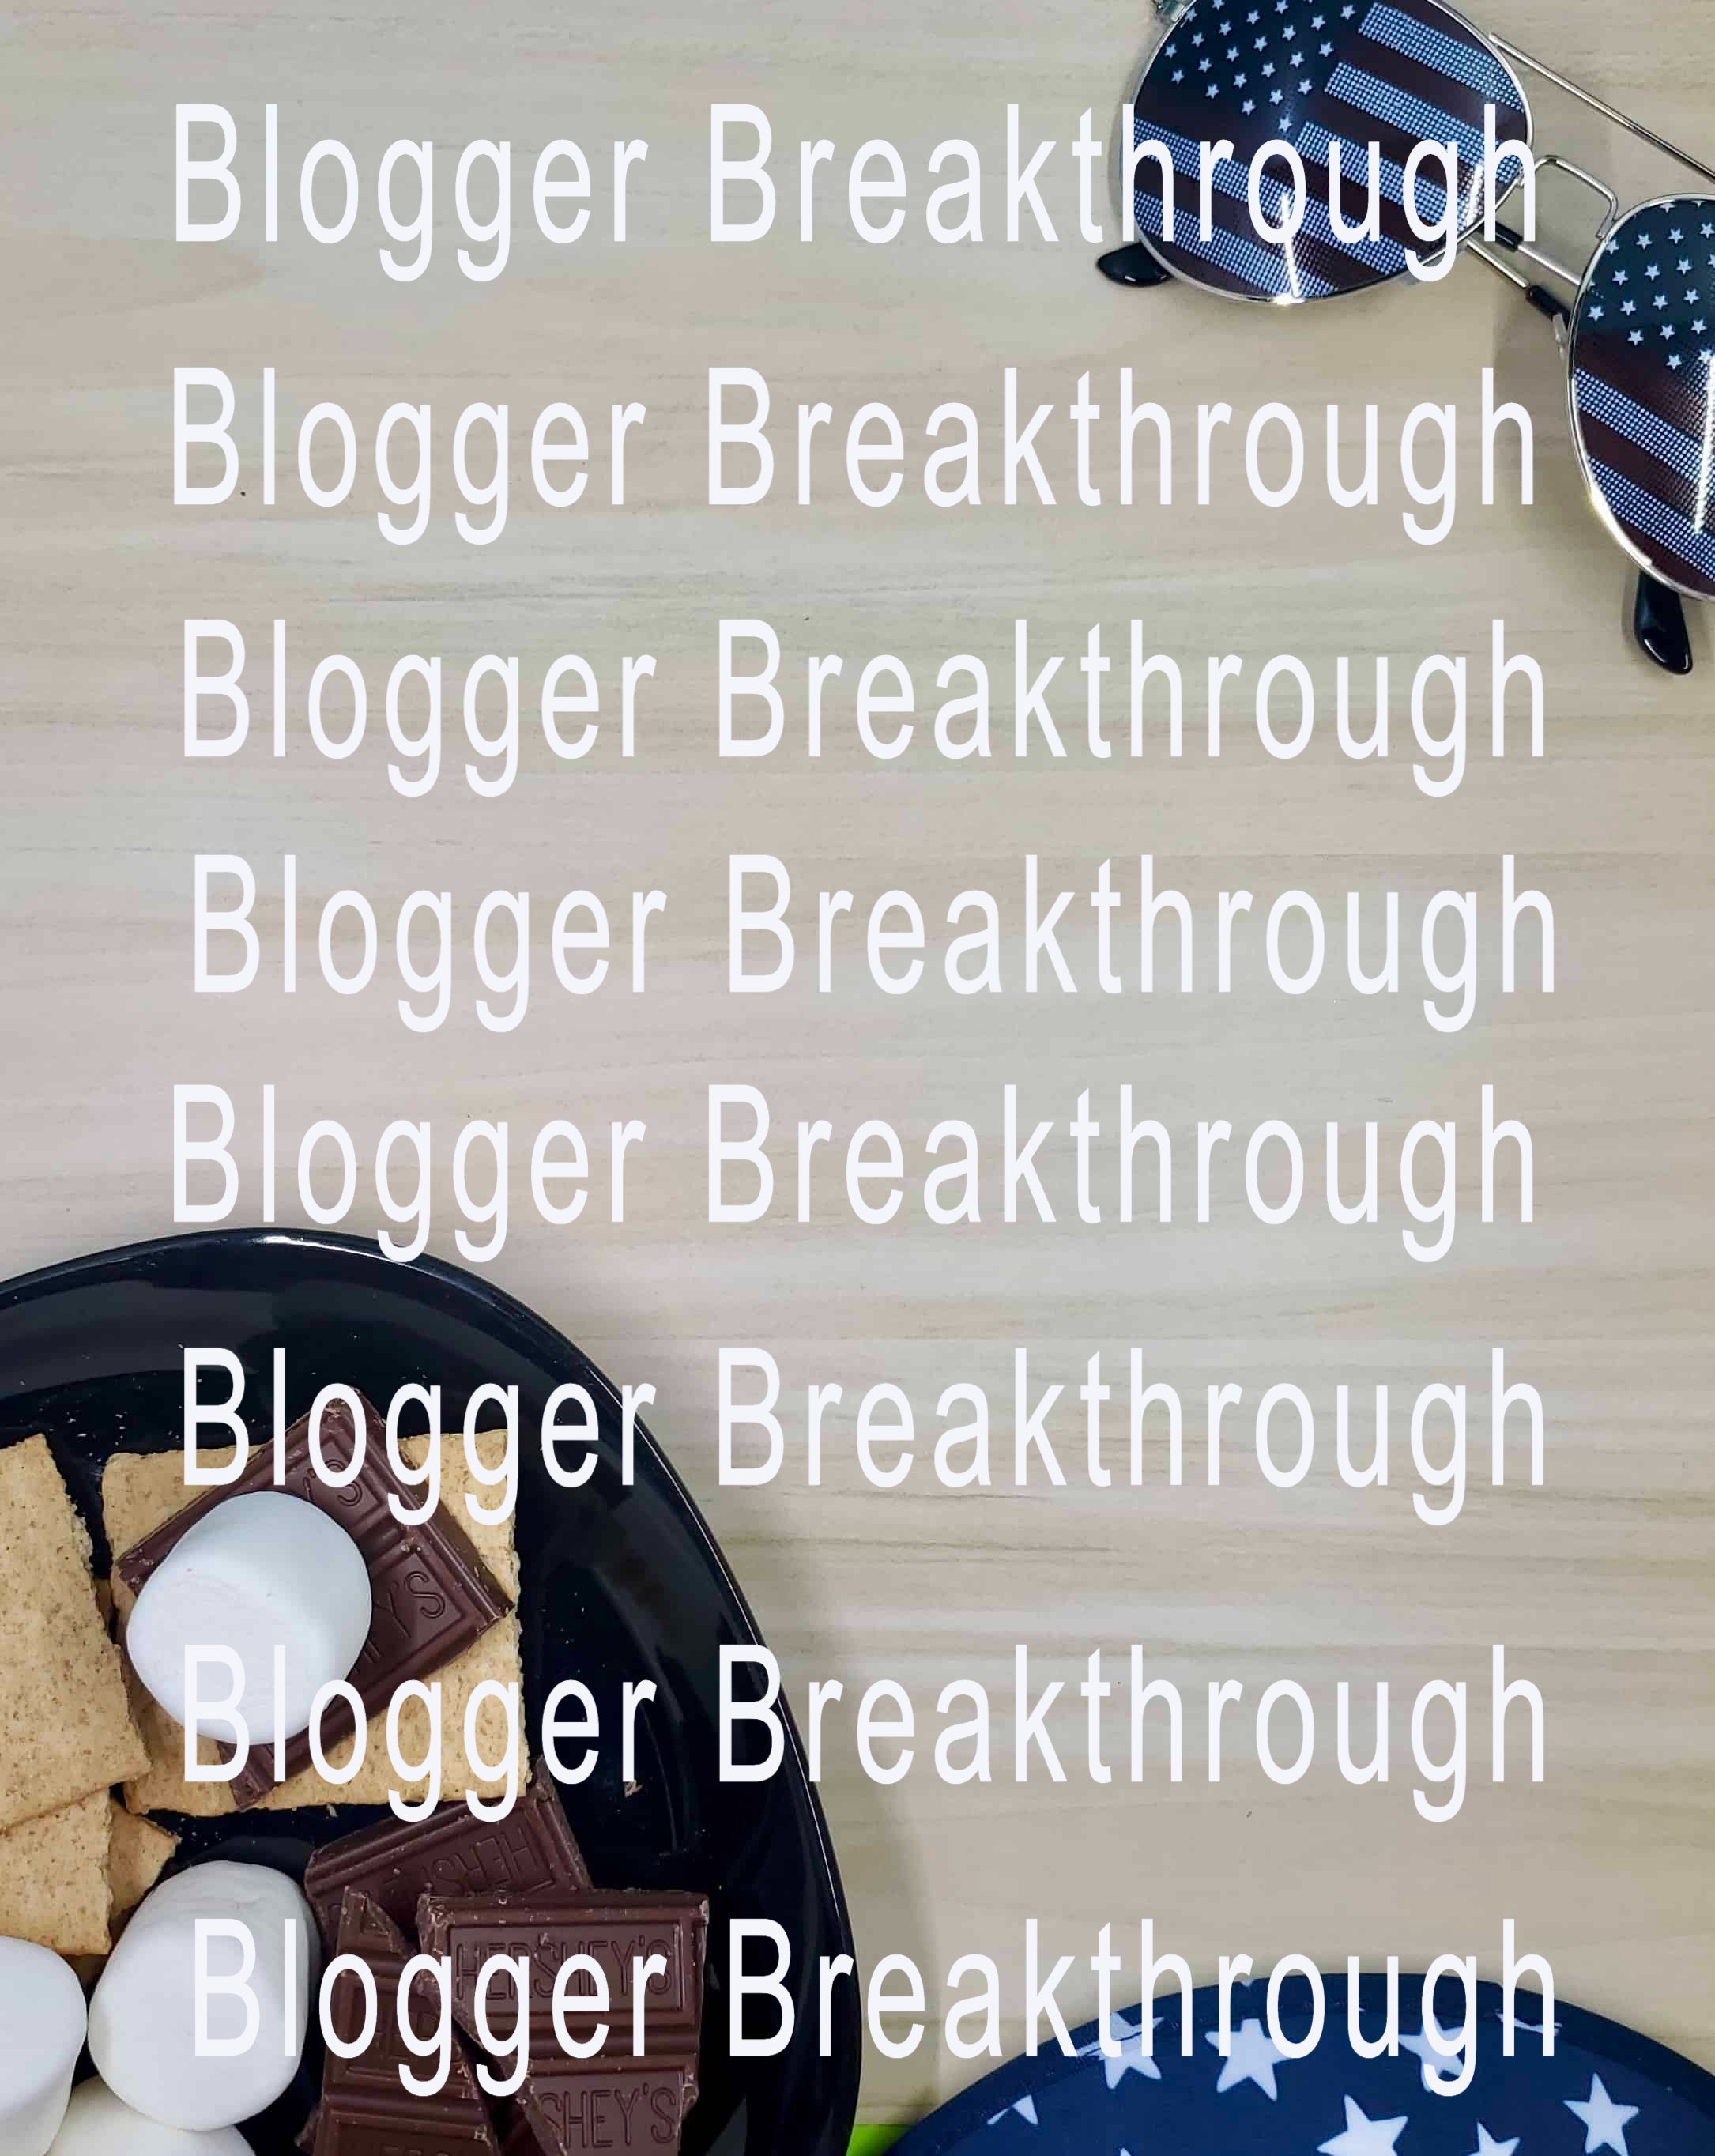 A plate of cookies and sunglasses on a wooden surface overlaid with the repeated text &quot;Summer Themed Stock Photos (set of 10) stand out Blogger Breakthrough Summit&quot;.